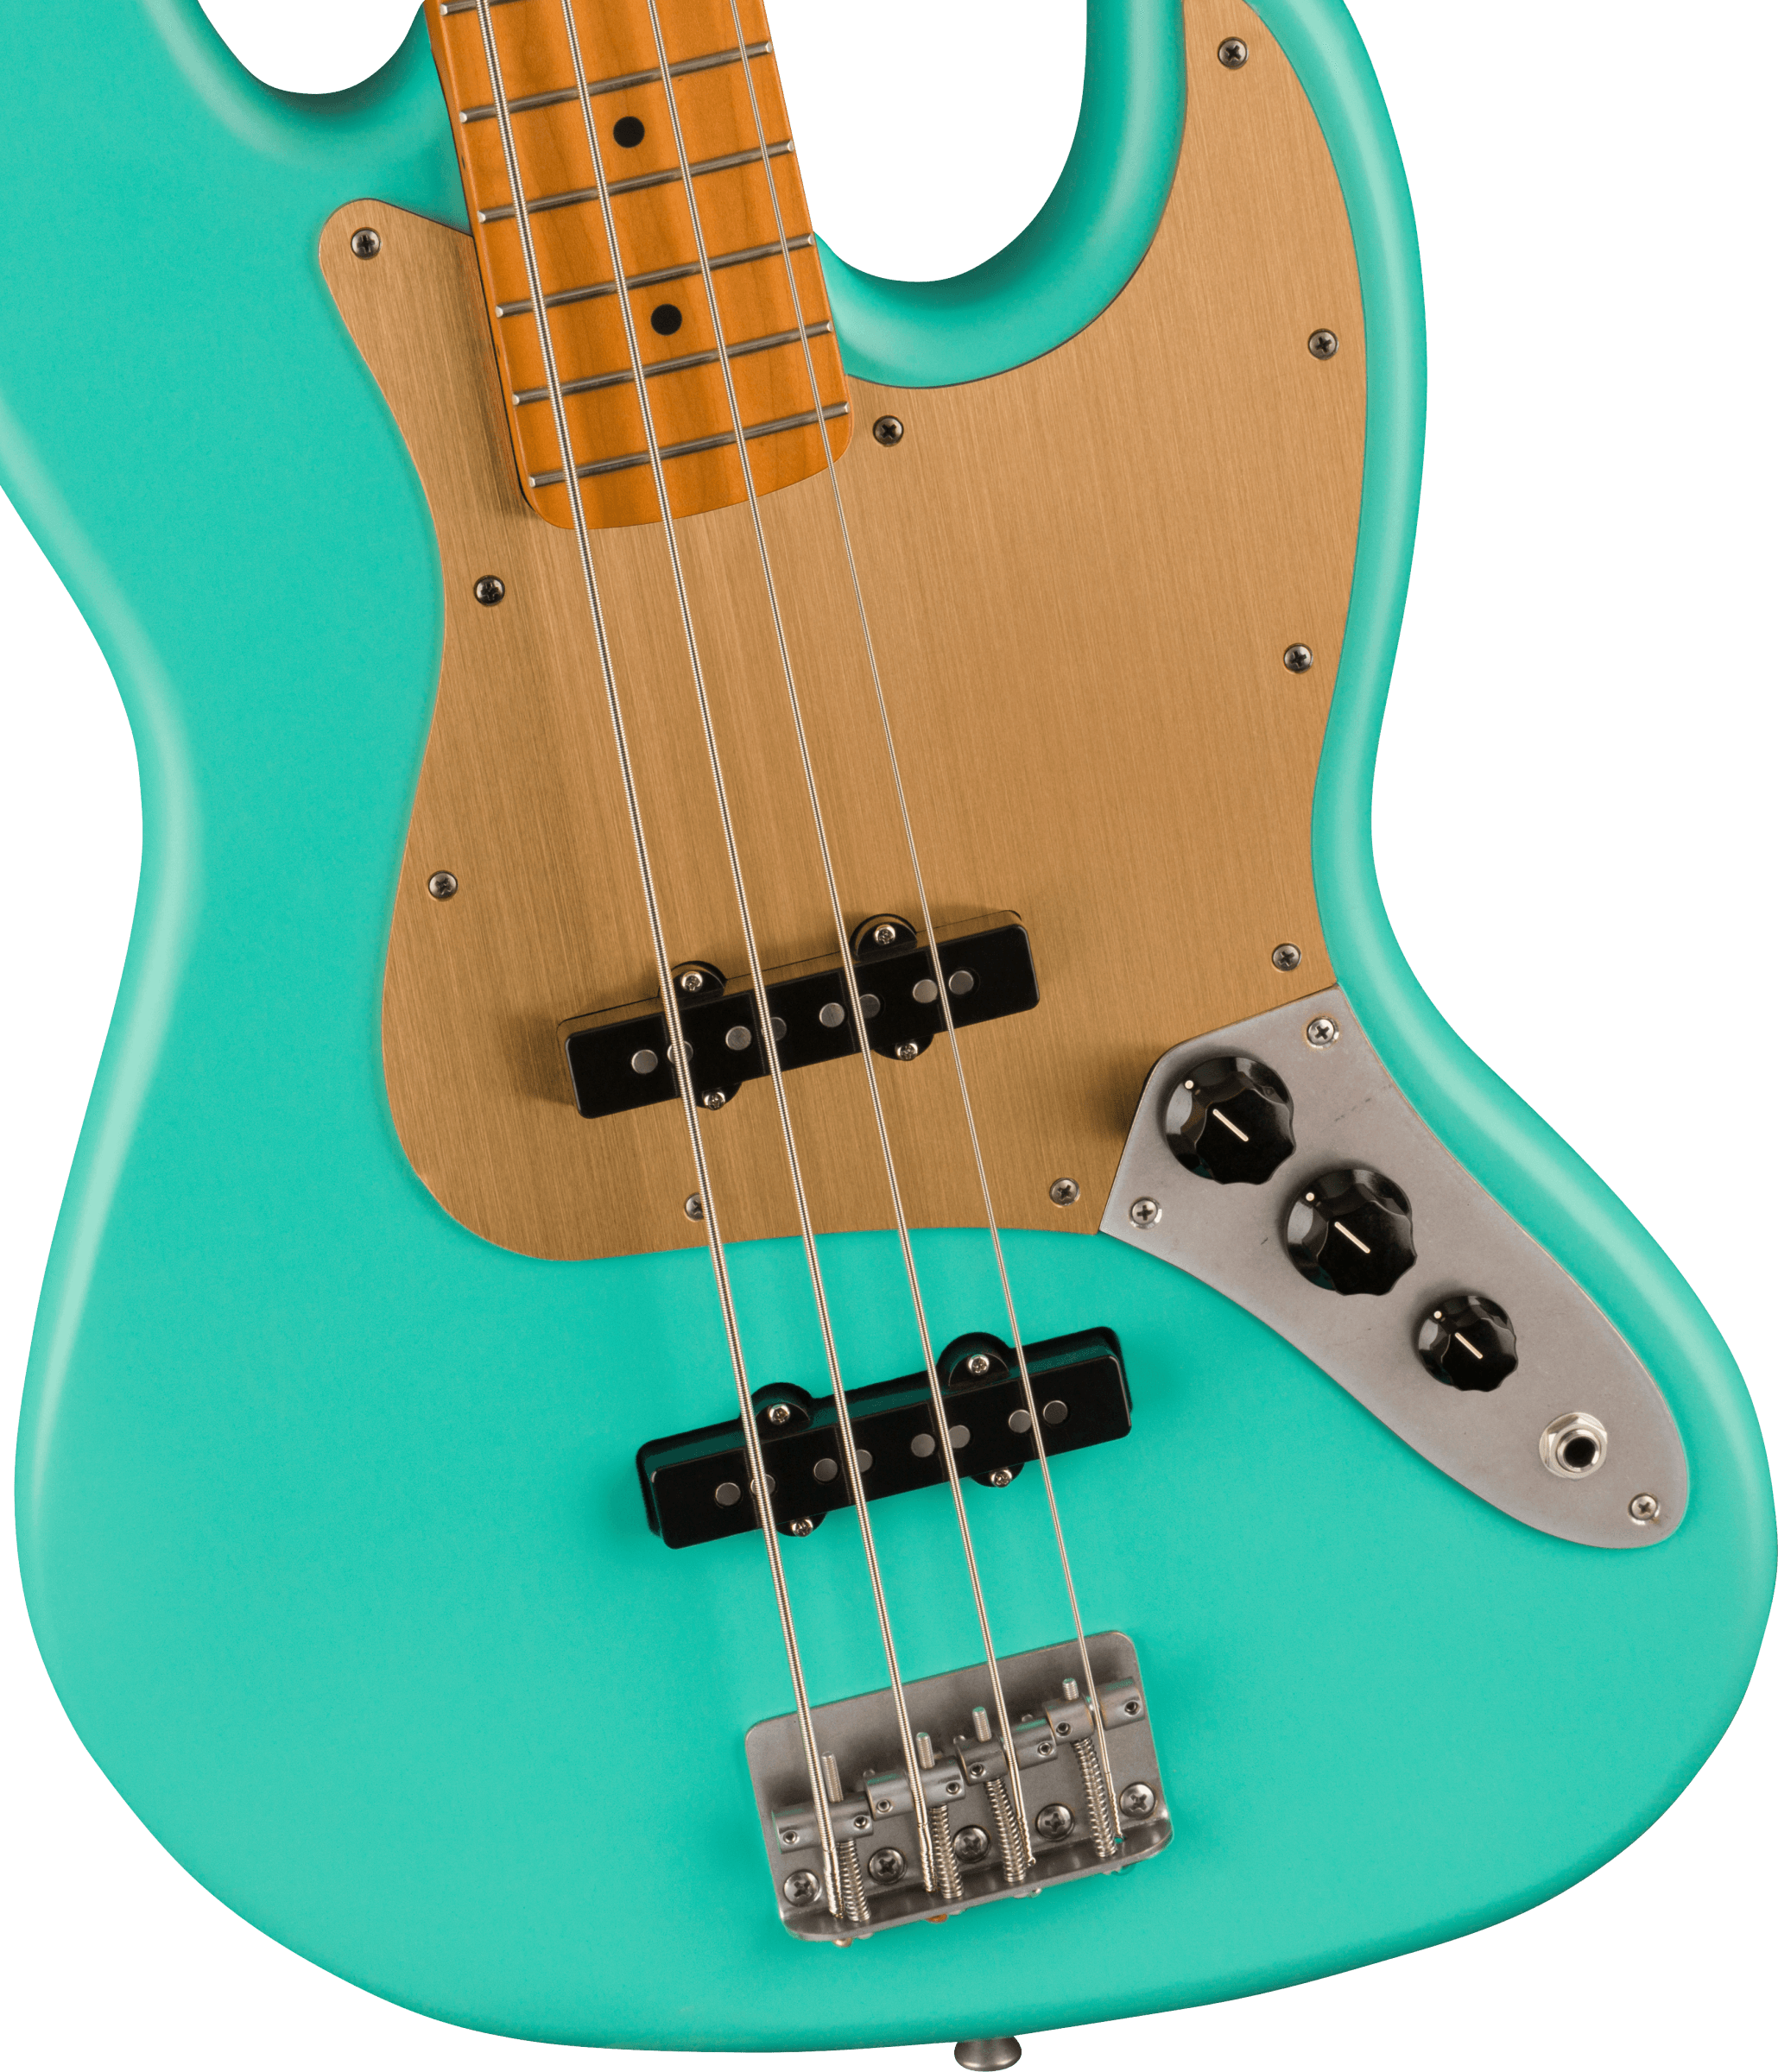 Squier Jazz Bass 40th Anniversary Gold Edition Mn - Satin Seafoam Green - Solid body electric bass - Variation 2